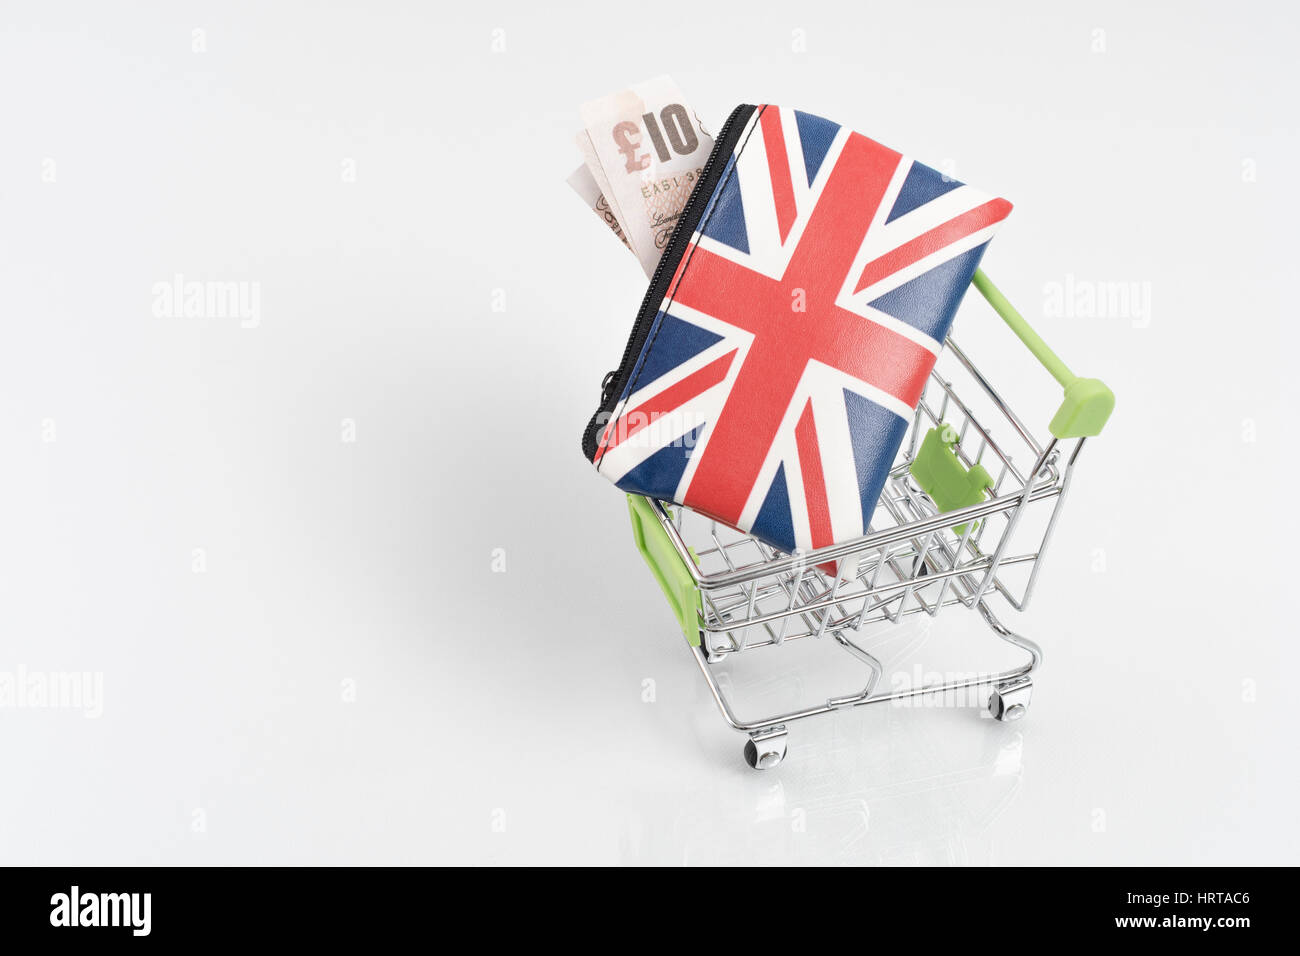 Union Jack coin purse / wallet with £10 banknote in a toy shopping trolley. Metaphor for UK consumer spending, economy and retail/high street sales Stock Photo